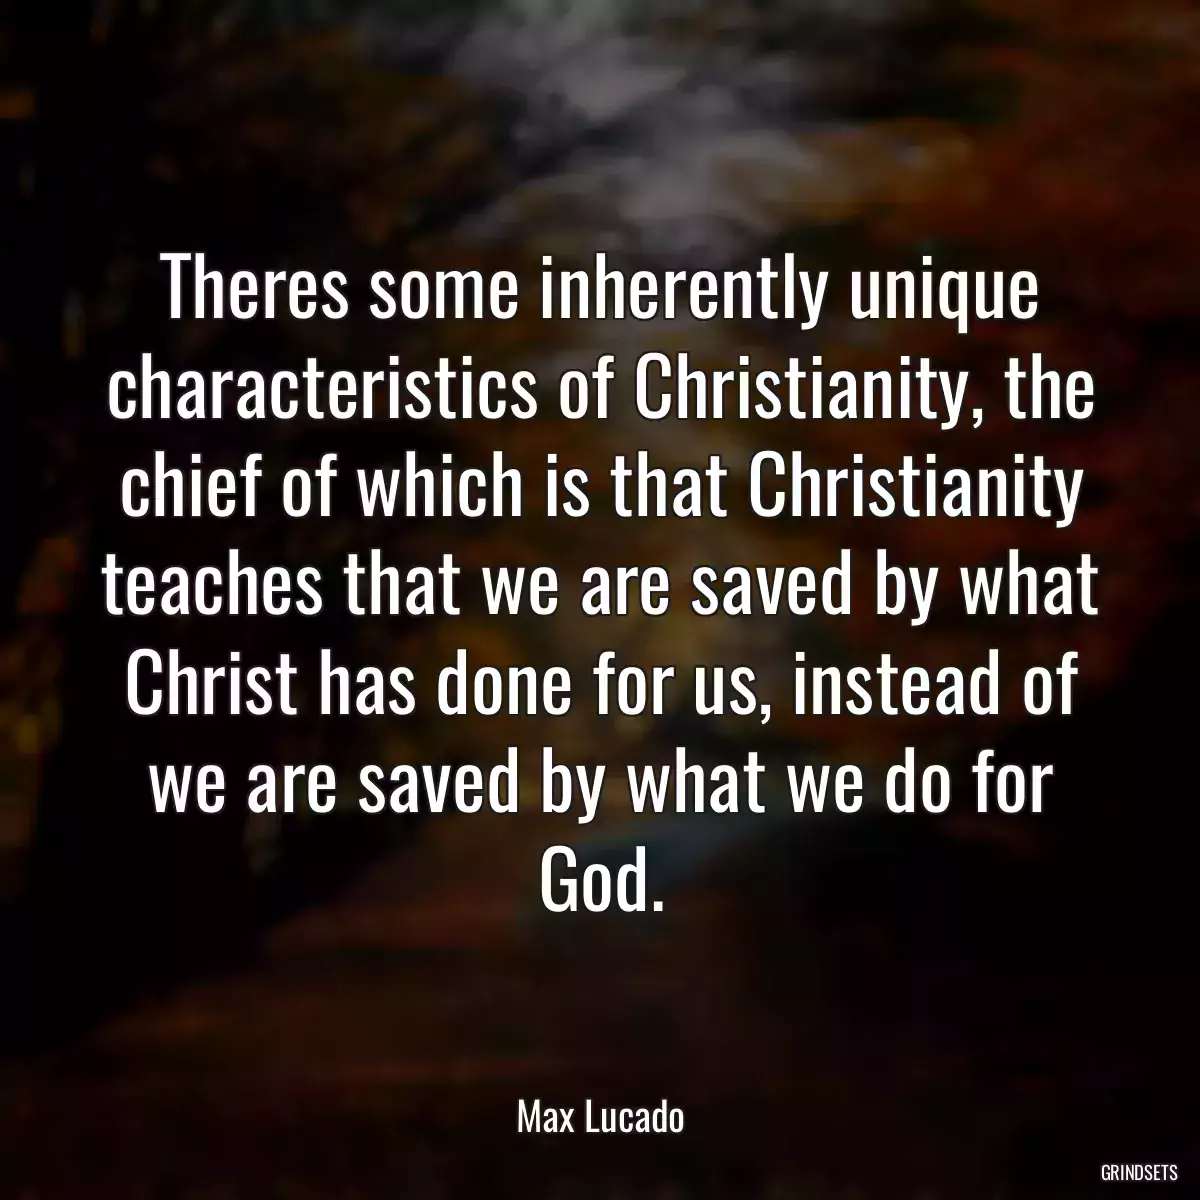 Theres some inherently unique characteristics of Christianity, the chief of which is that Christianity teaches that we are saved by what Christ has done for us, instead of we are saved by what we do for God.